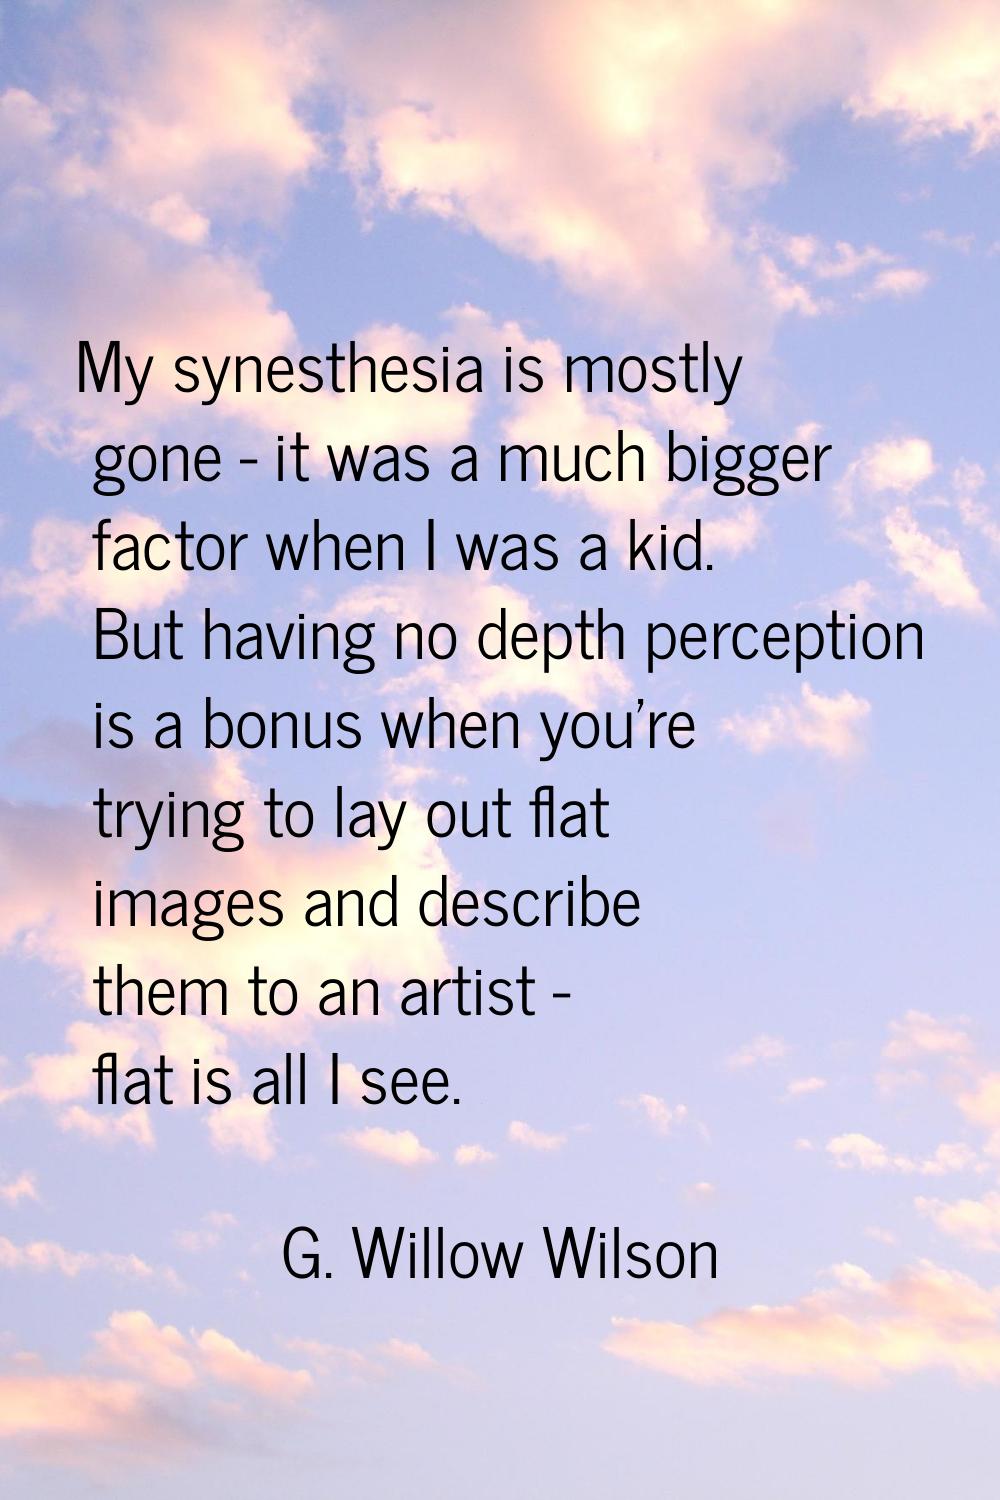 My synesthesia is mostly gone - it was a much bigger factor when I was a kid. But having no depth p